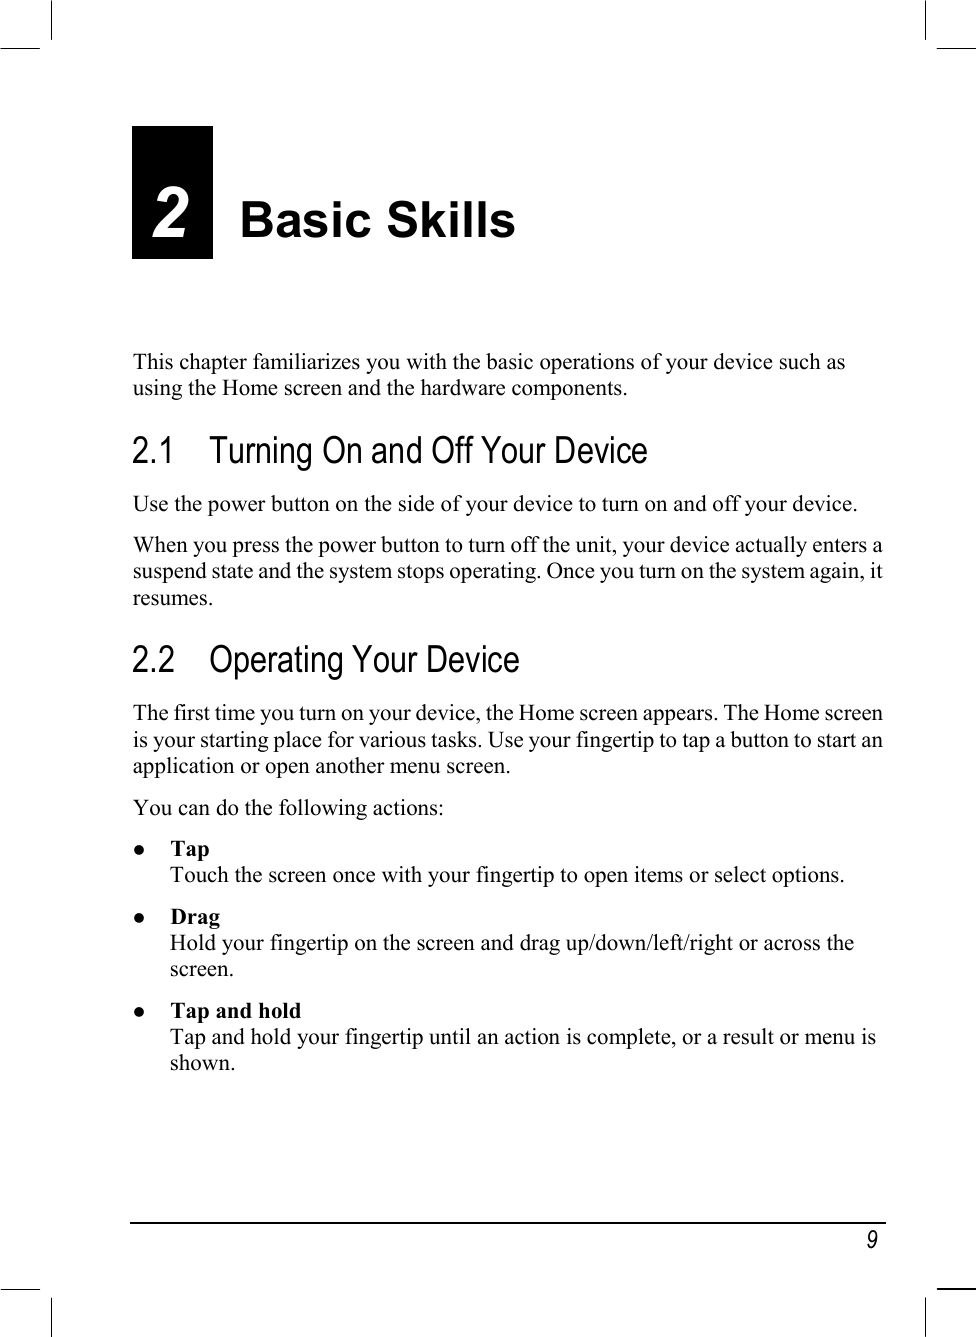   9 2  Basic Skills This chapter familiarizes you with the basic operations of your device such as using the Home screen and the hardware components. 2.1  Turning On and Off Your Device Use the power button on the side of your device to turn on and off your device. When you press the power button to turn off the unit, your device actually enters a suspend state and the system stops operating. Once you turn on the system again, it resumes. 2.2  Operating Your Device The first time you turn on your device, the Home screen appears. The Home screen is your starting place for various tasks. Use your fingertip to tap a button to start an application or open another menu screen. You can do the following actions:   Tap Touch the screen once with your fingertip to open items or select options.   Drag Hold your fingertip on the screen and drag up/down/left/right or across the screen.   Tap and hold Tap and hold your fingertip until an action is complete, or a result or menu is shown. 